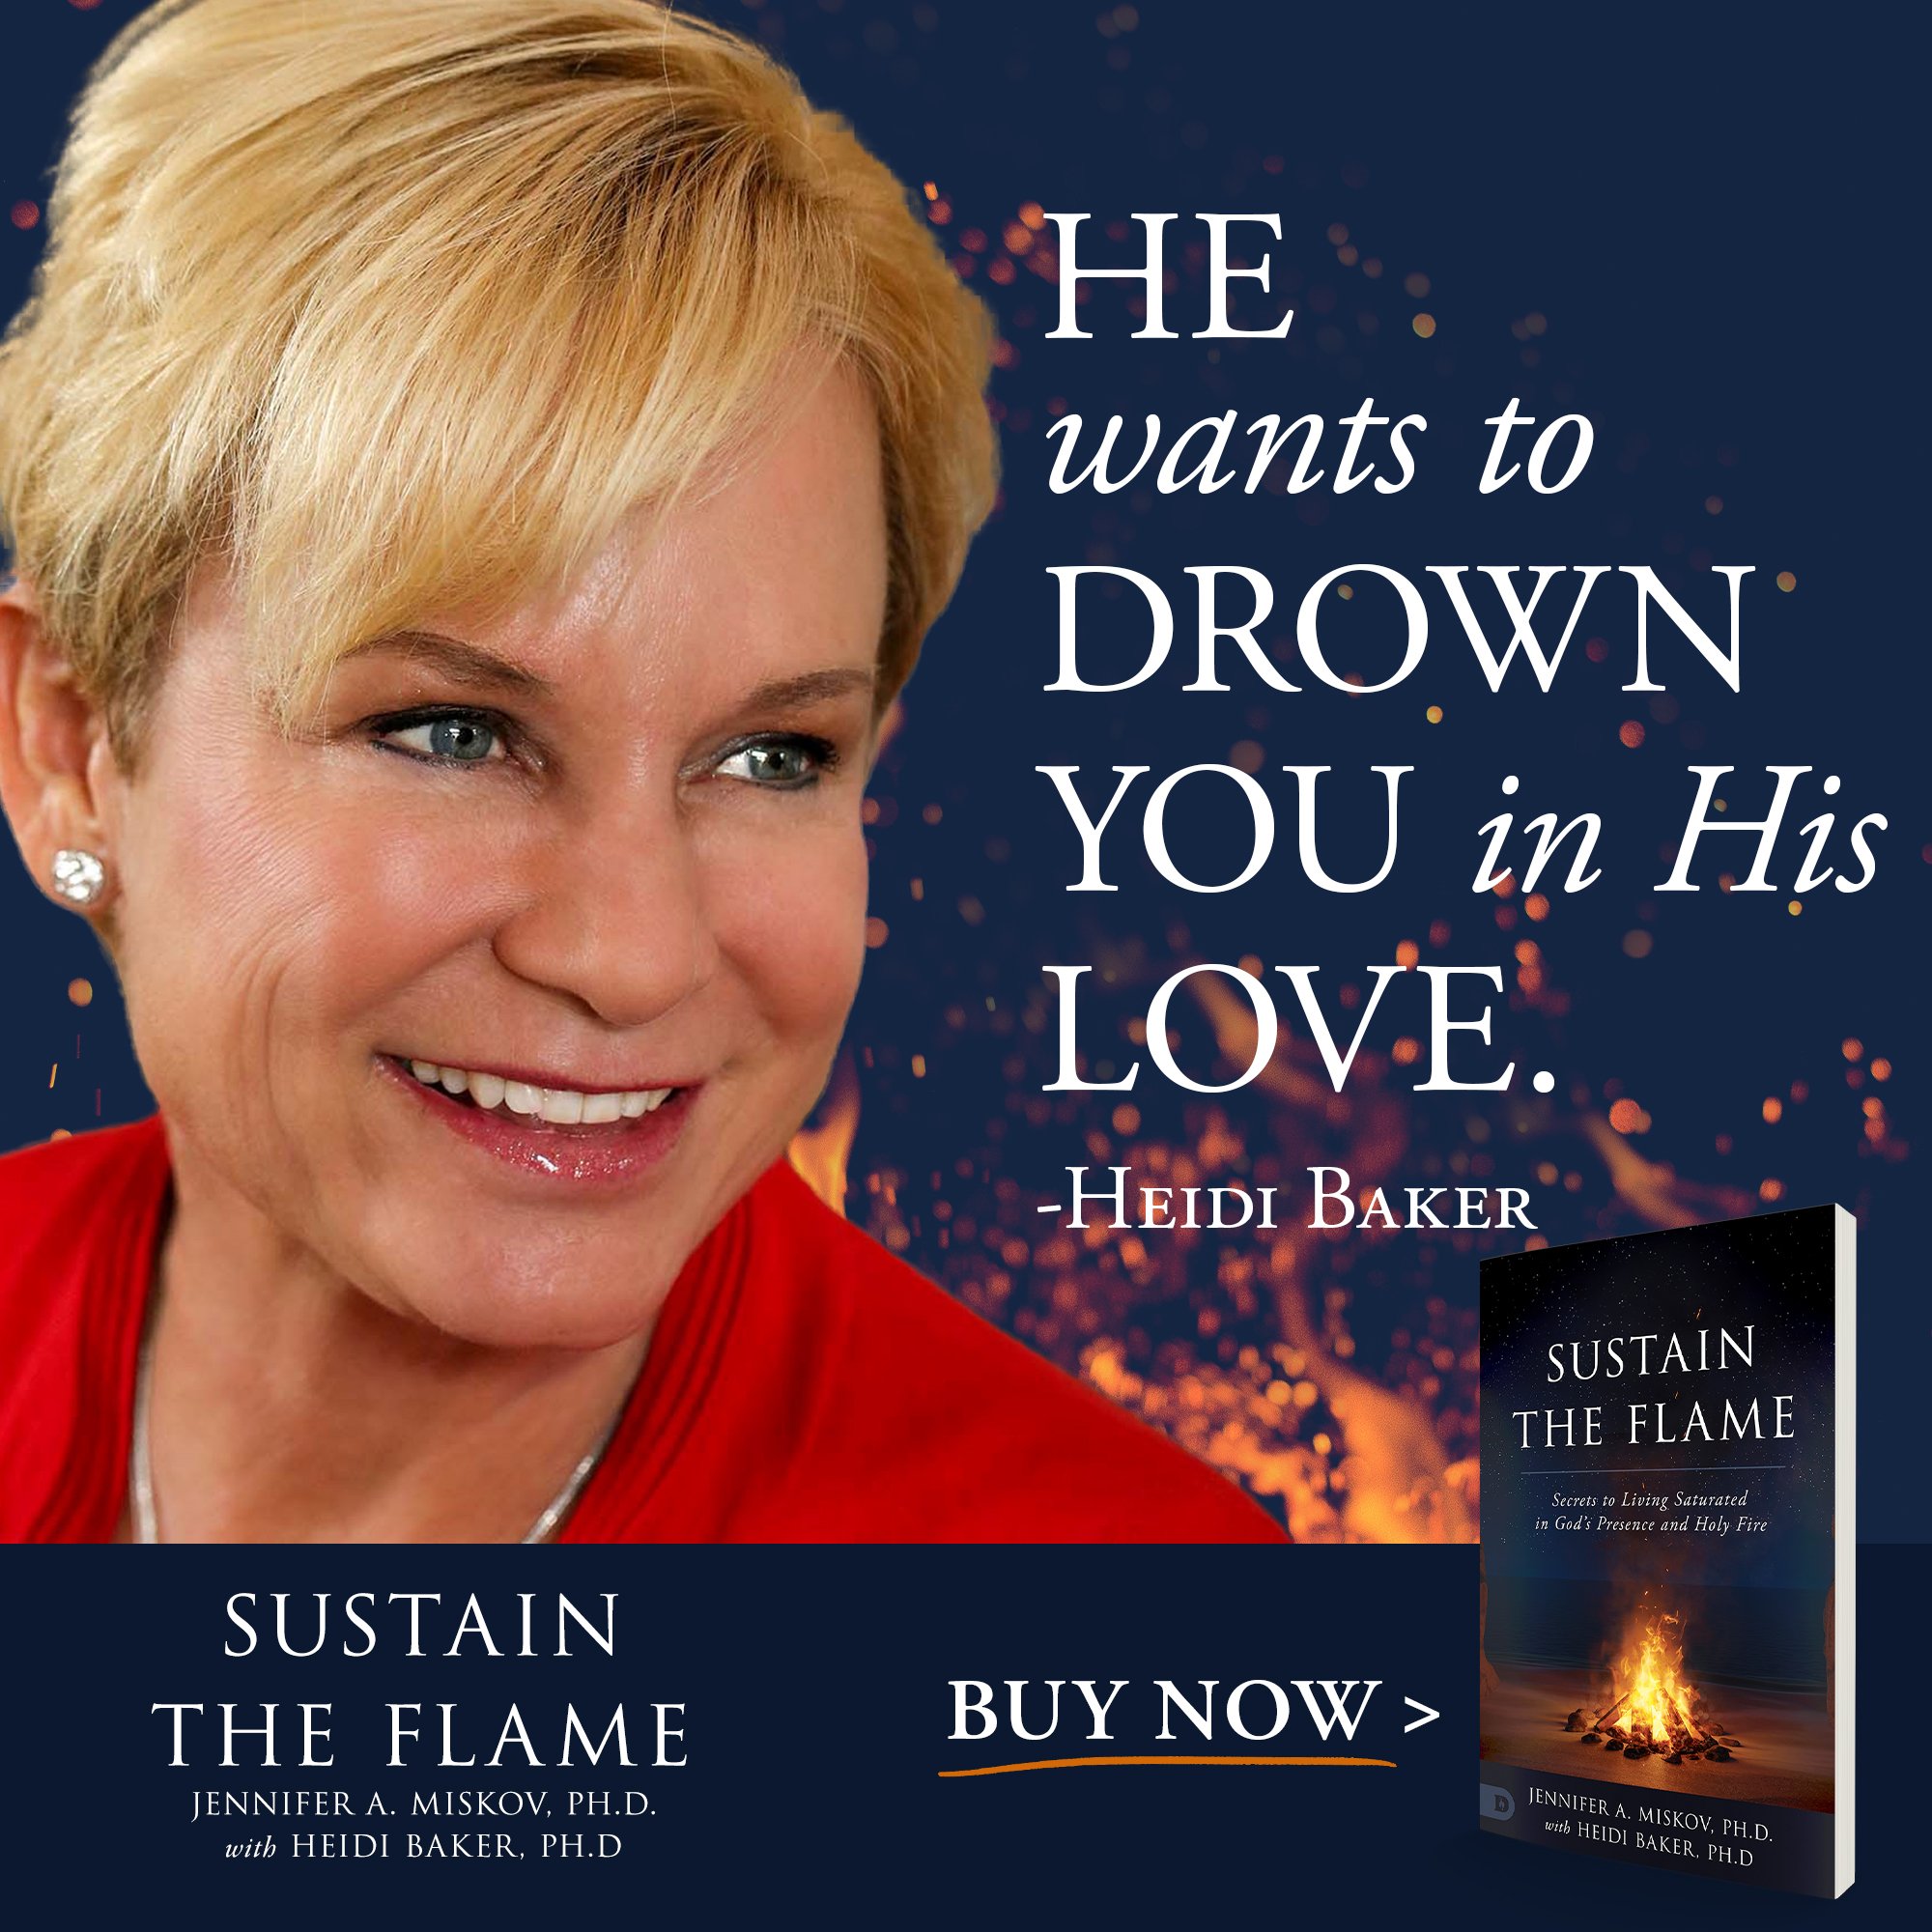 Sustain the Flame_promo-graphics-4.jpg